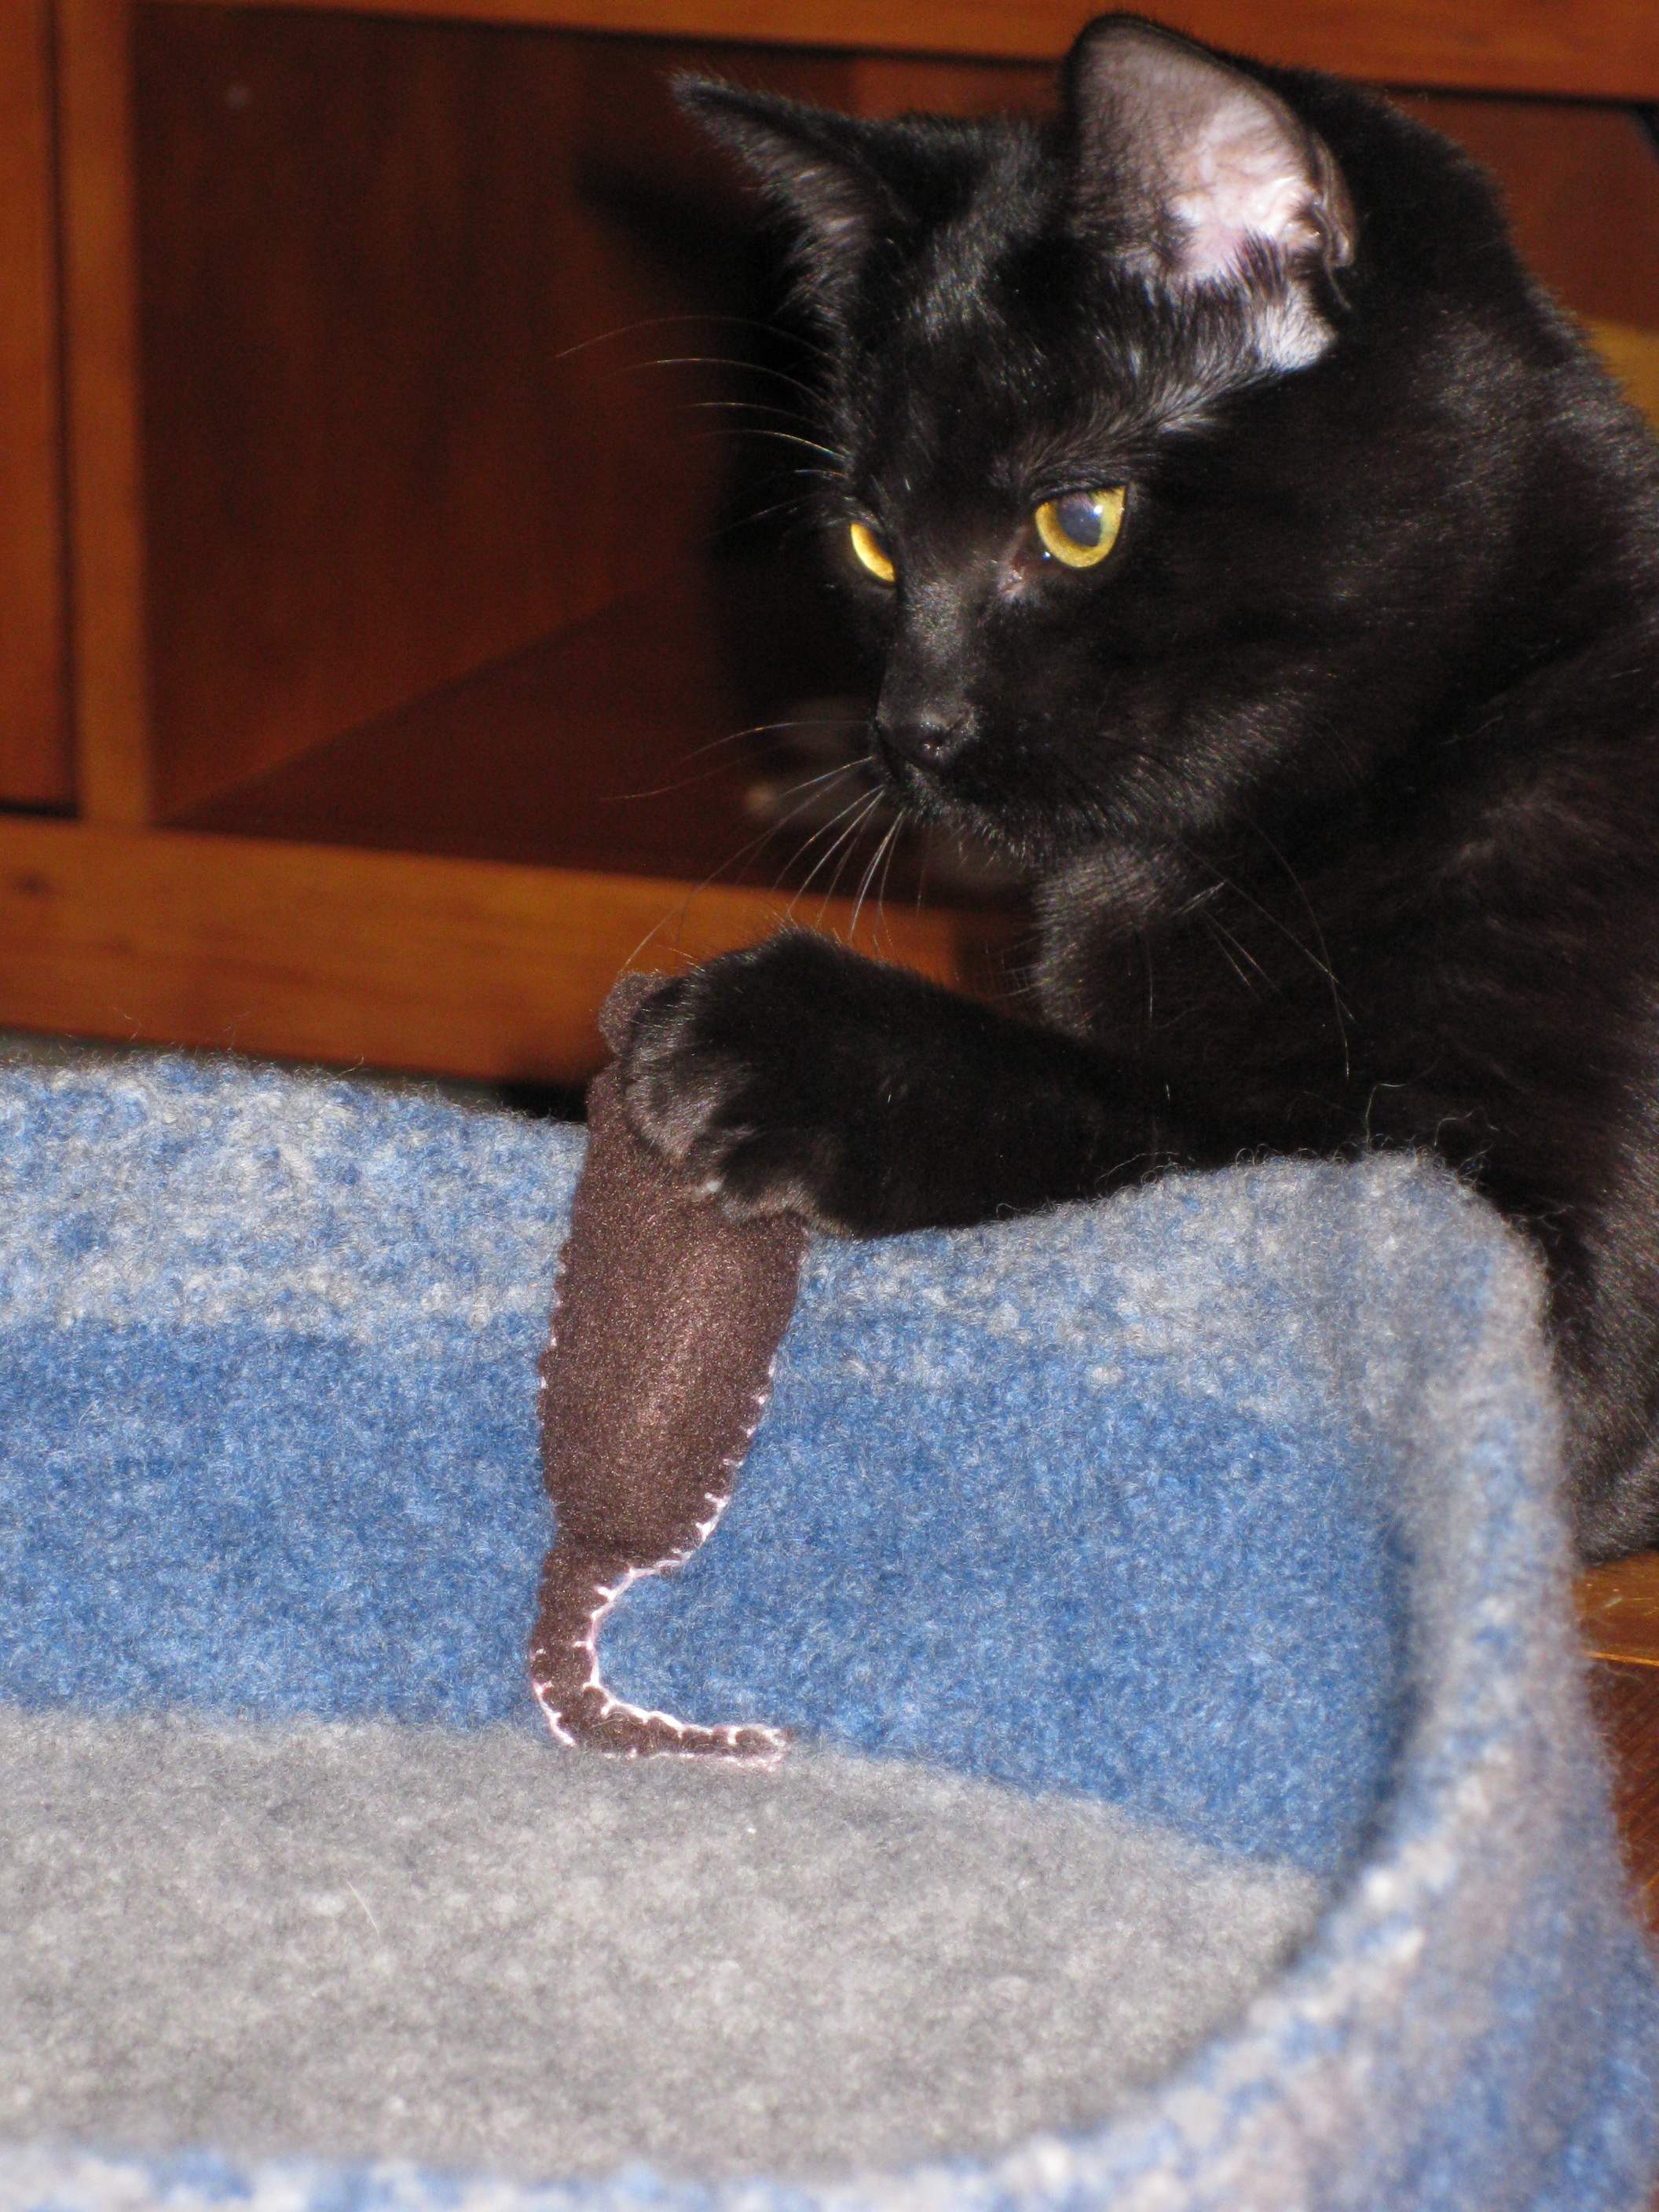 “Lucy ‘catches’ a mouse.” Jacqui says: “the mouse and the bed are felted. The cat, however, is not.” - Jacqui Whitemore